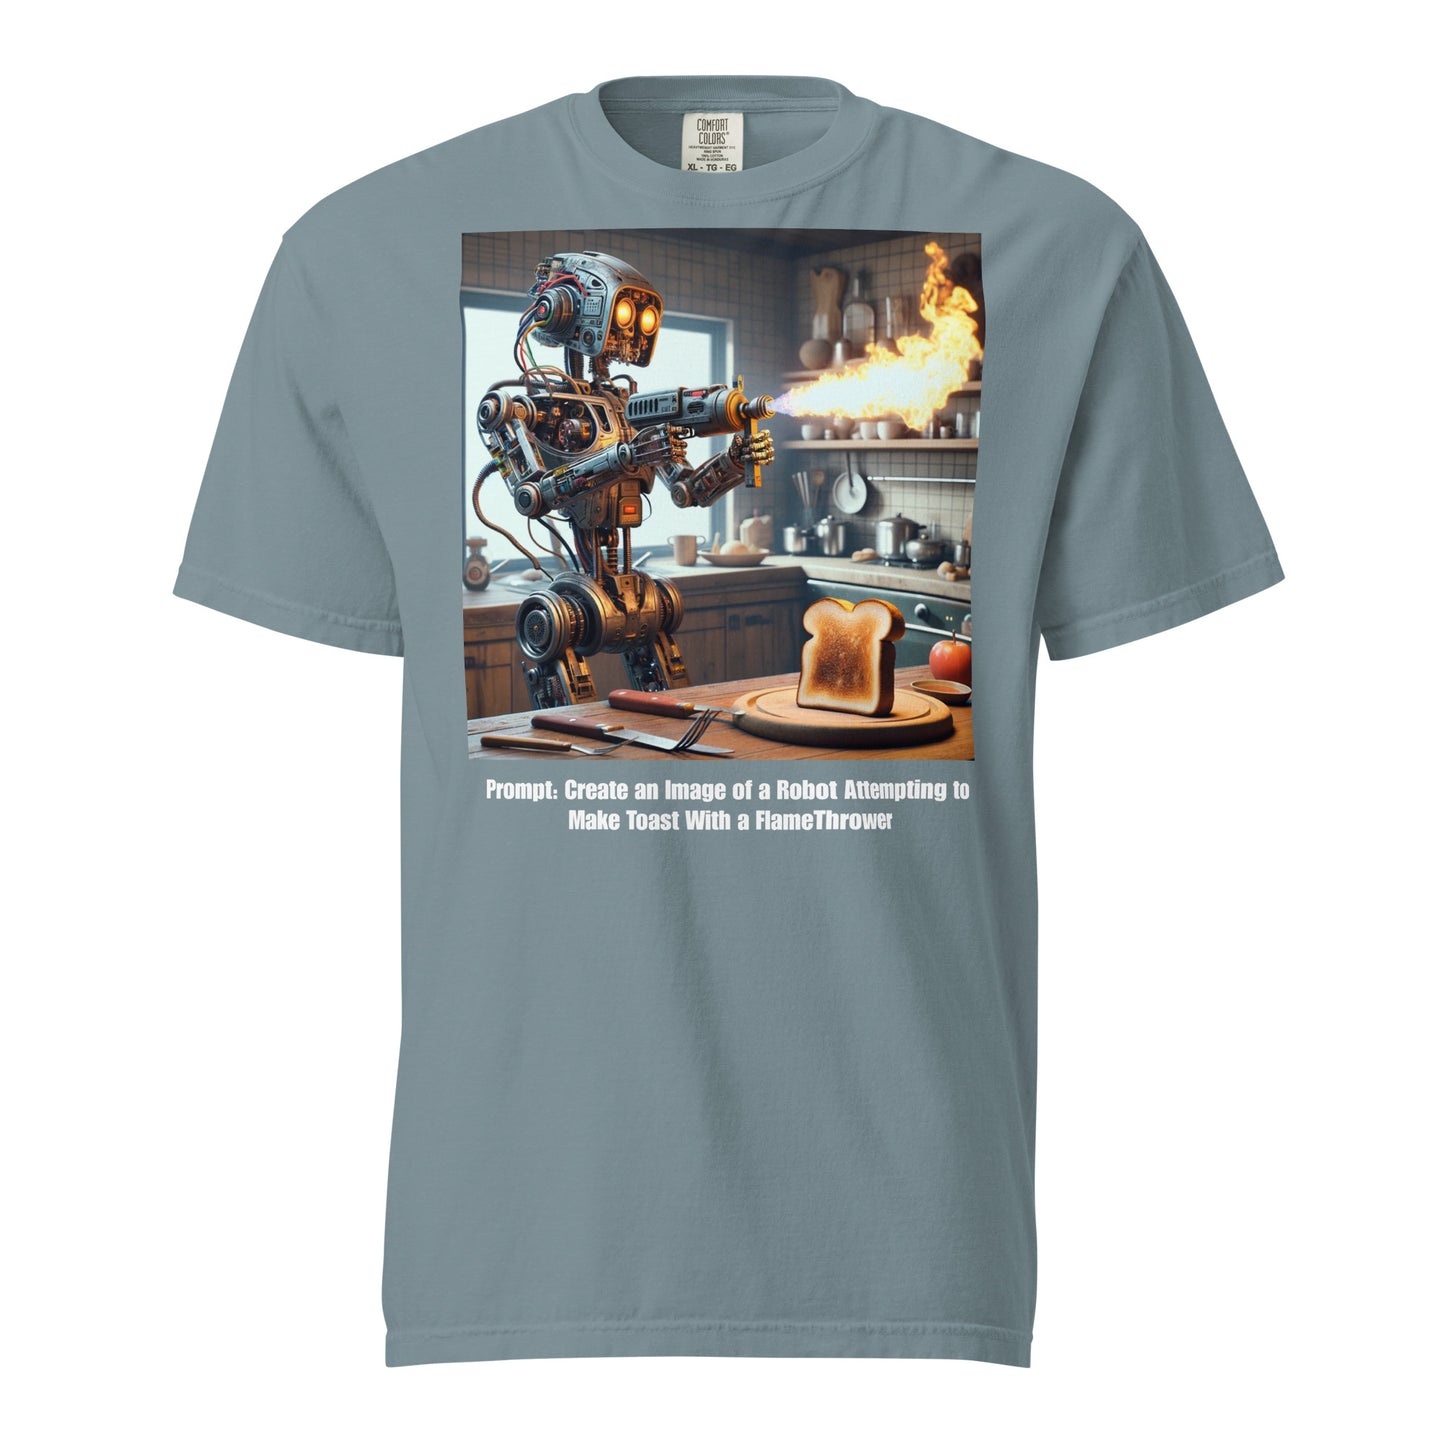 Laughing with AI: Humorous Tee for Artificial Intelligence Enthusiasts